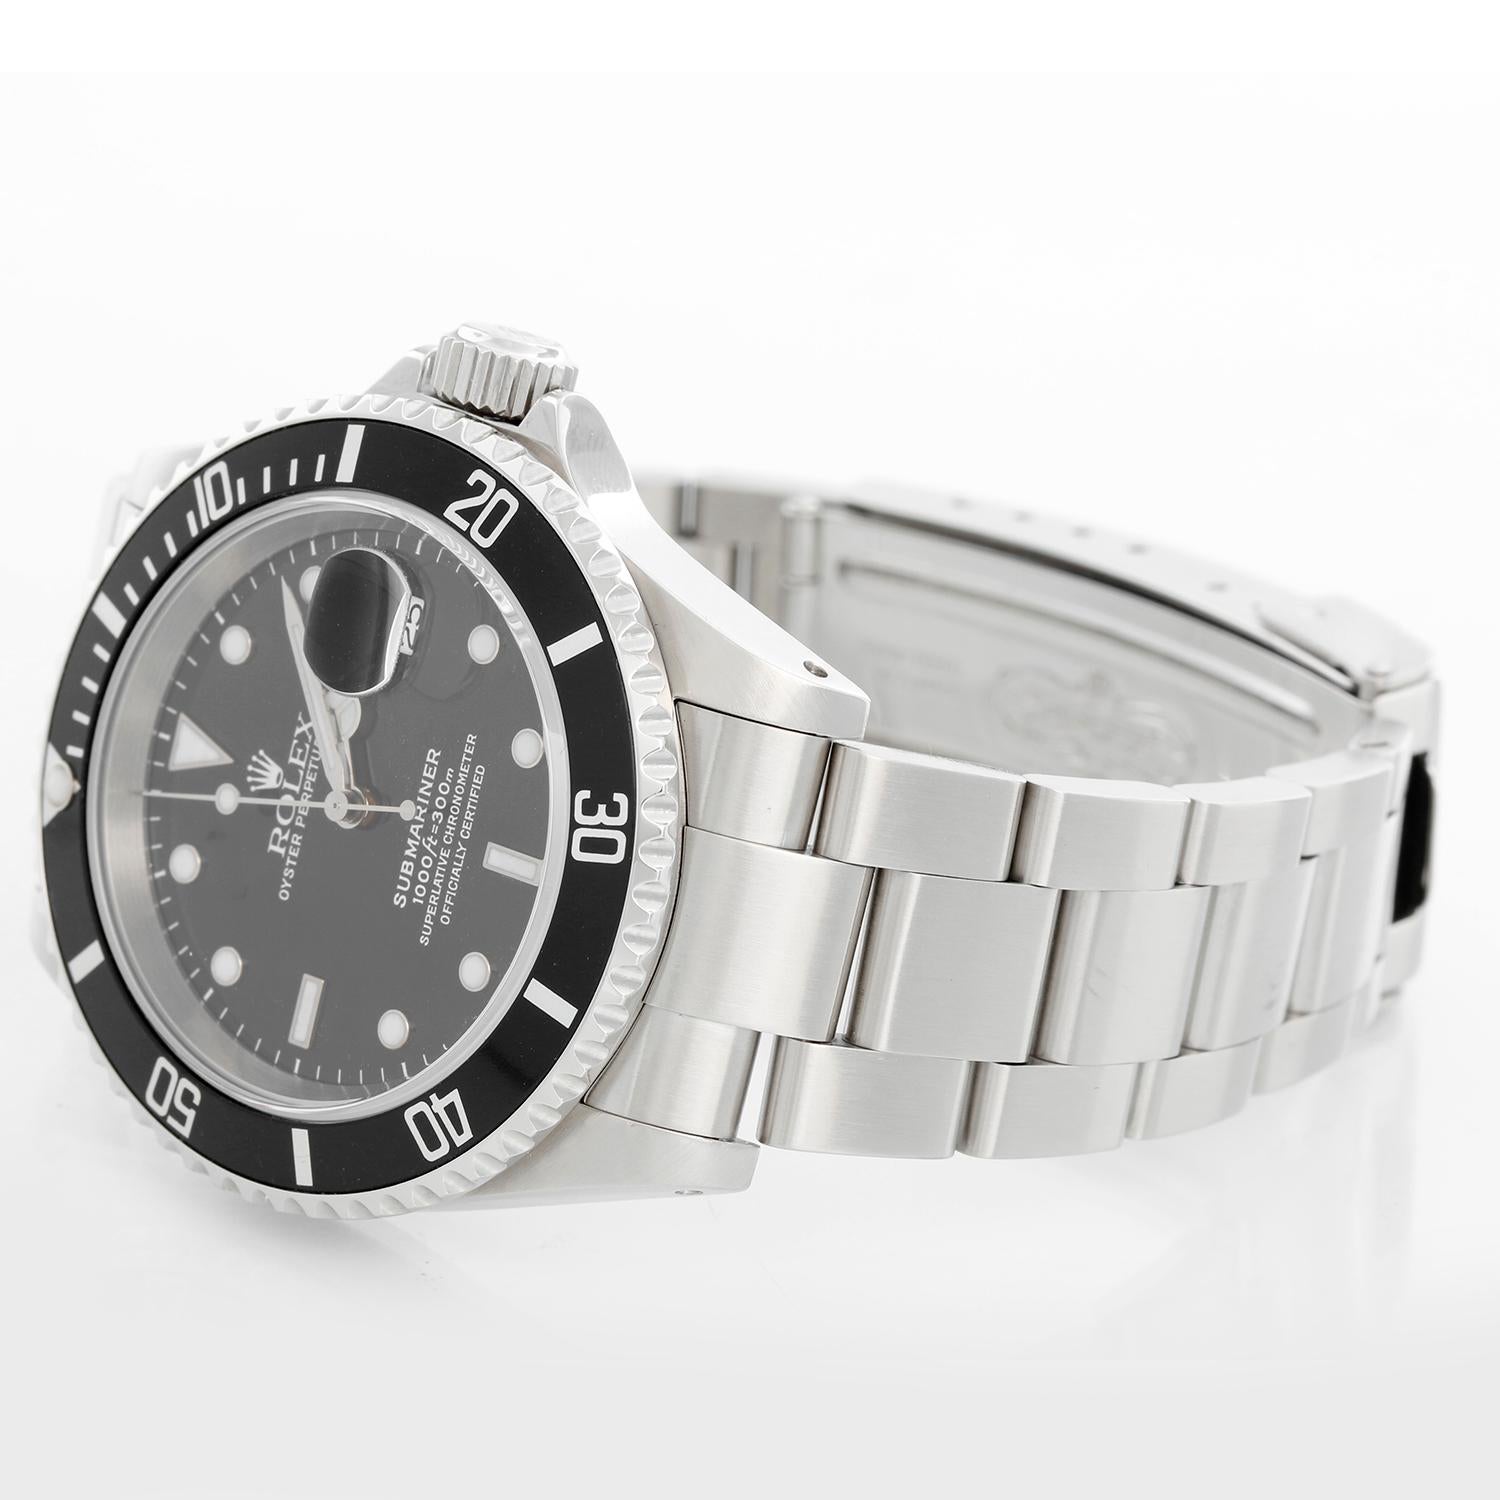 Rolex Submariner 16610 Stainless Steel Men's Watch - Automatic winding, 31 jewels, Quickset, sapphire crystal. Stainless steel case; rotating bezel with black insert. Black Dial. Stainless steel Oyster bracelet with flip-lock clasp. Pre-owned with